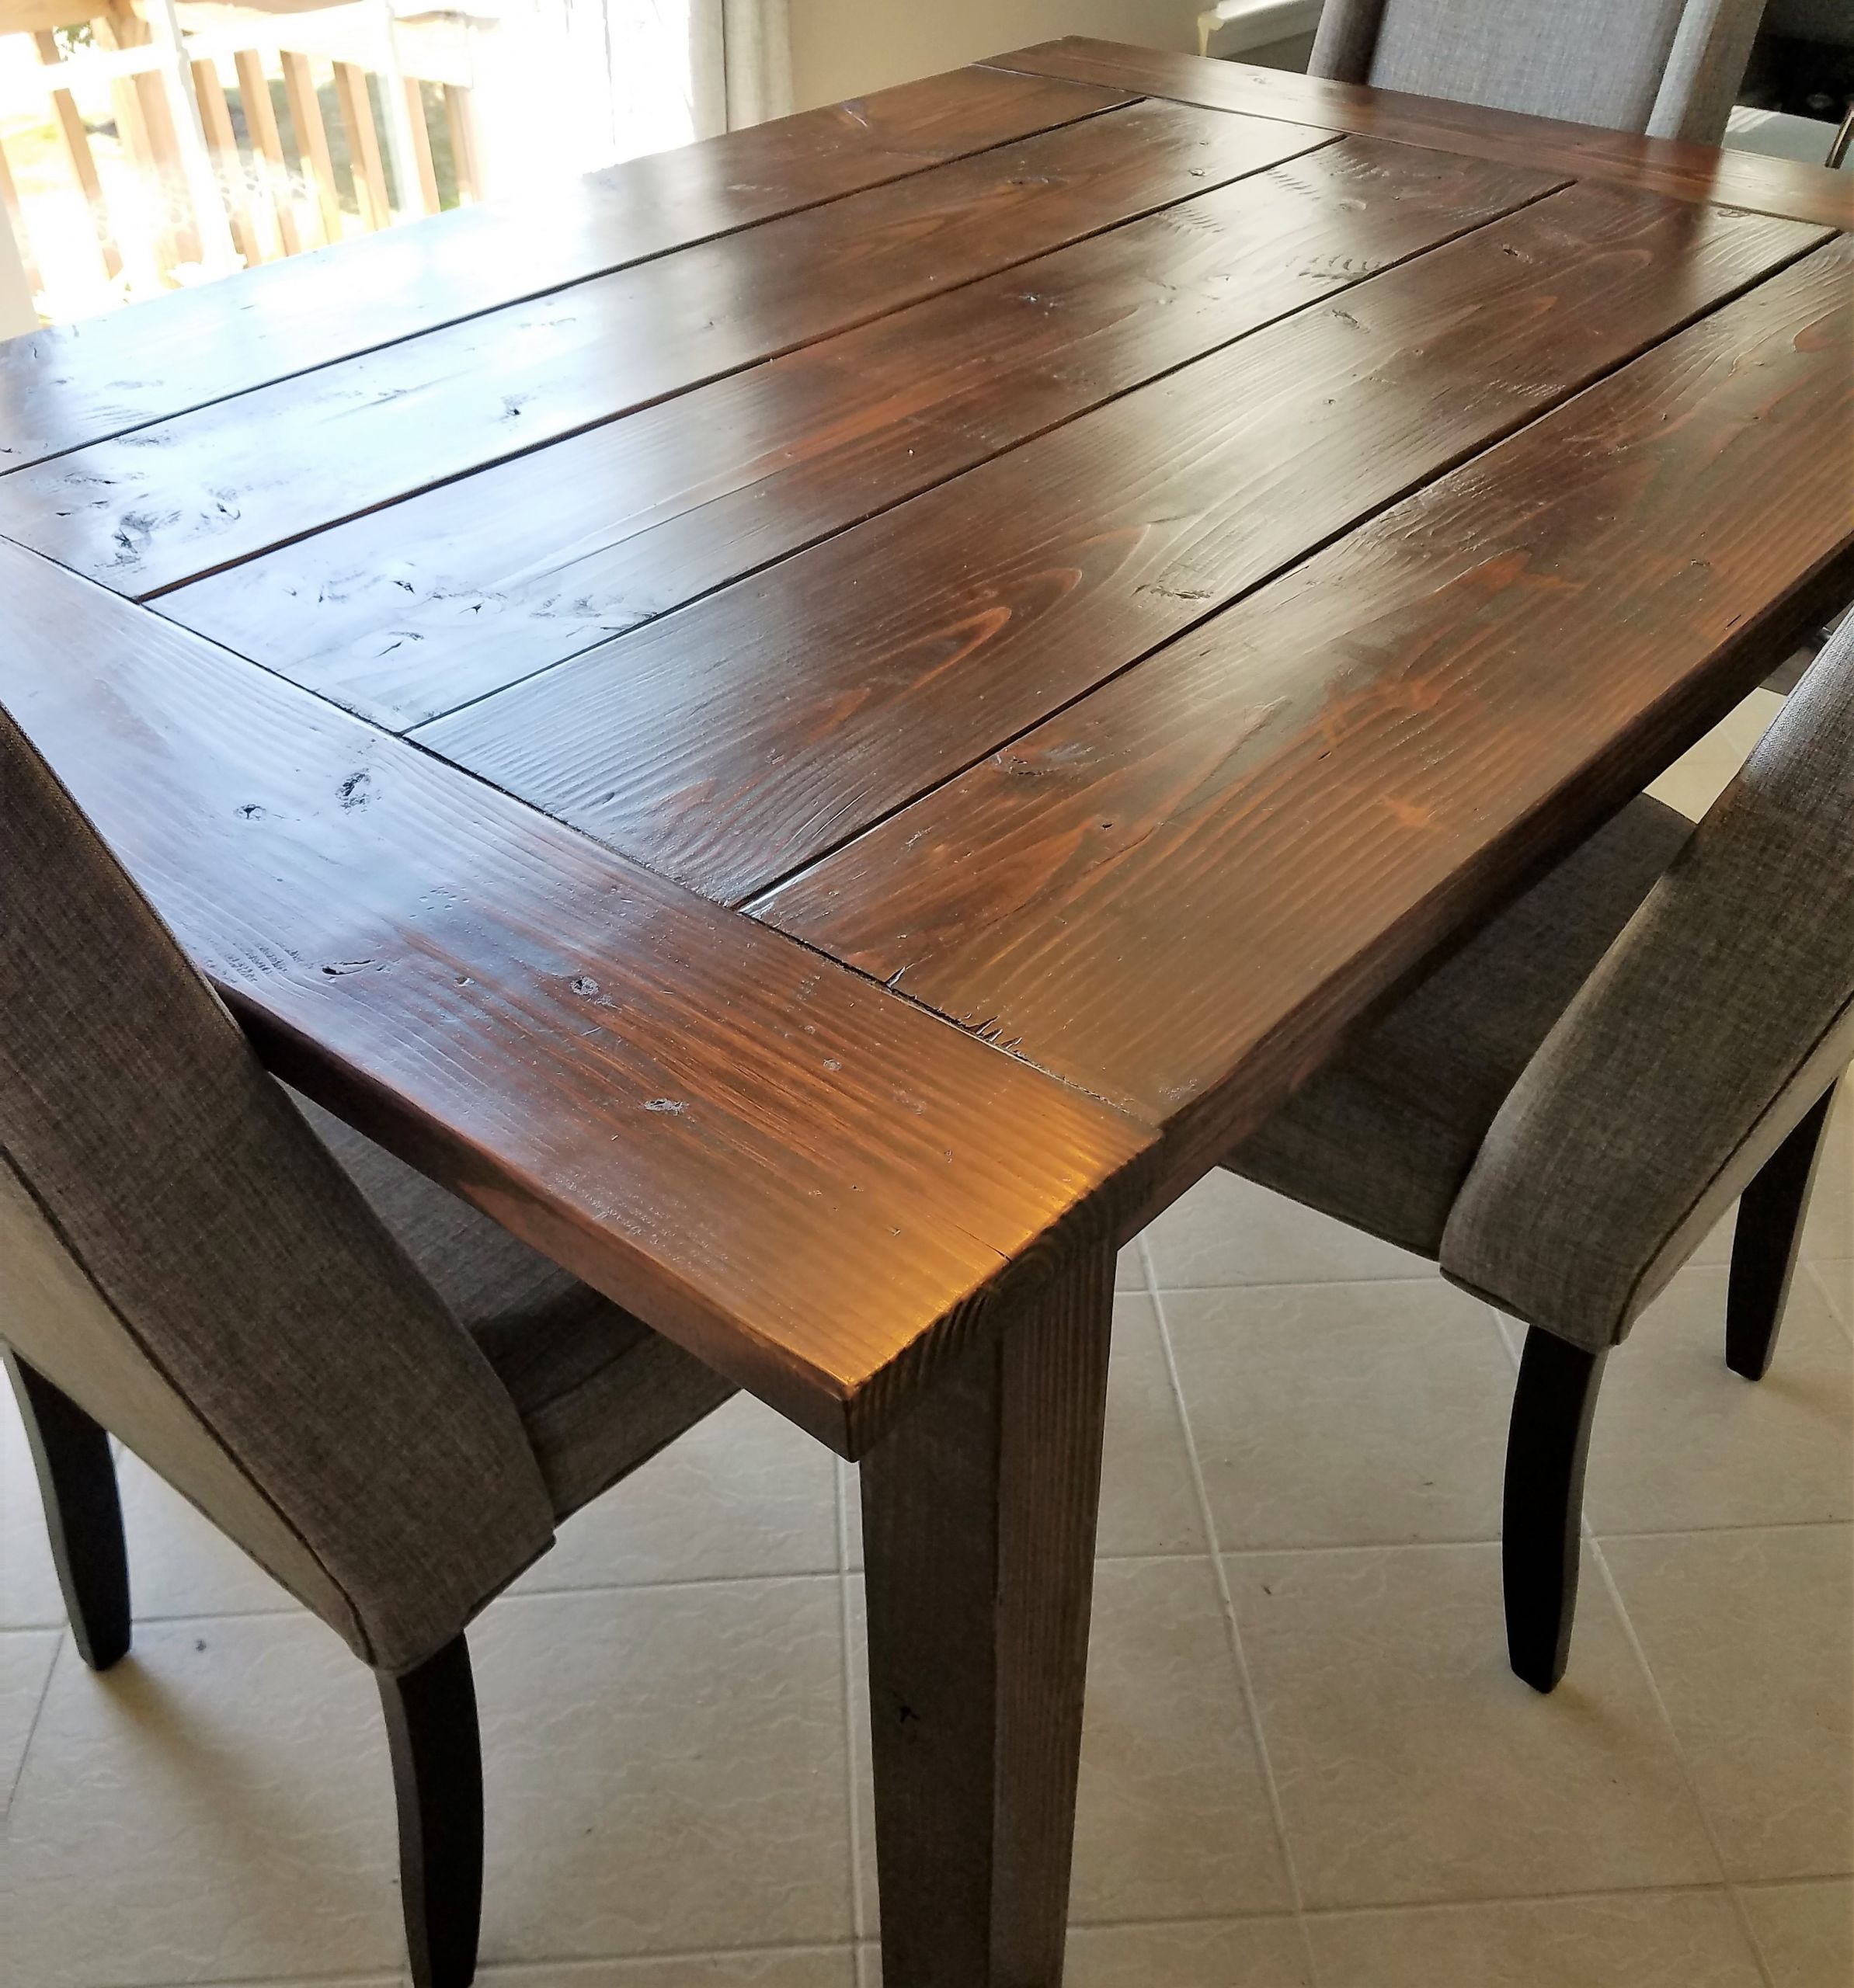 Rustic Modern Kitchen Table
 Rustic Modern Kitchen Table rock solid rustic